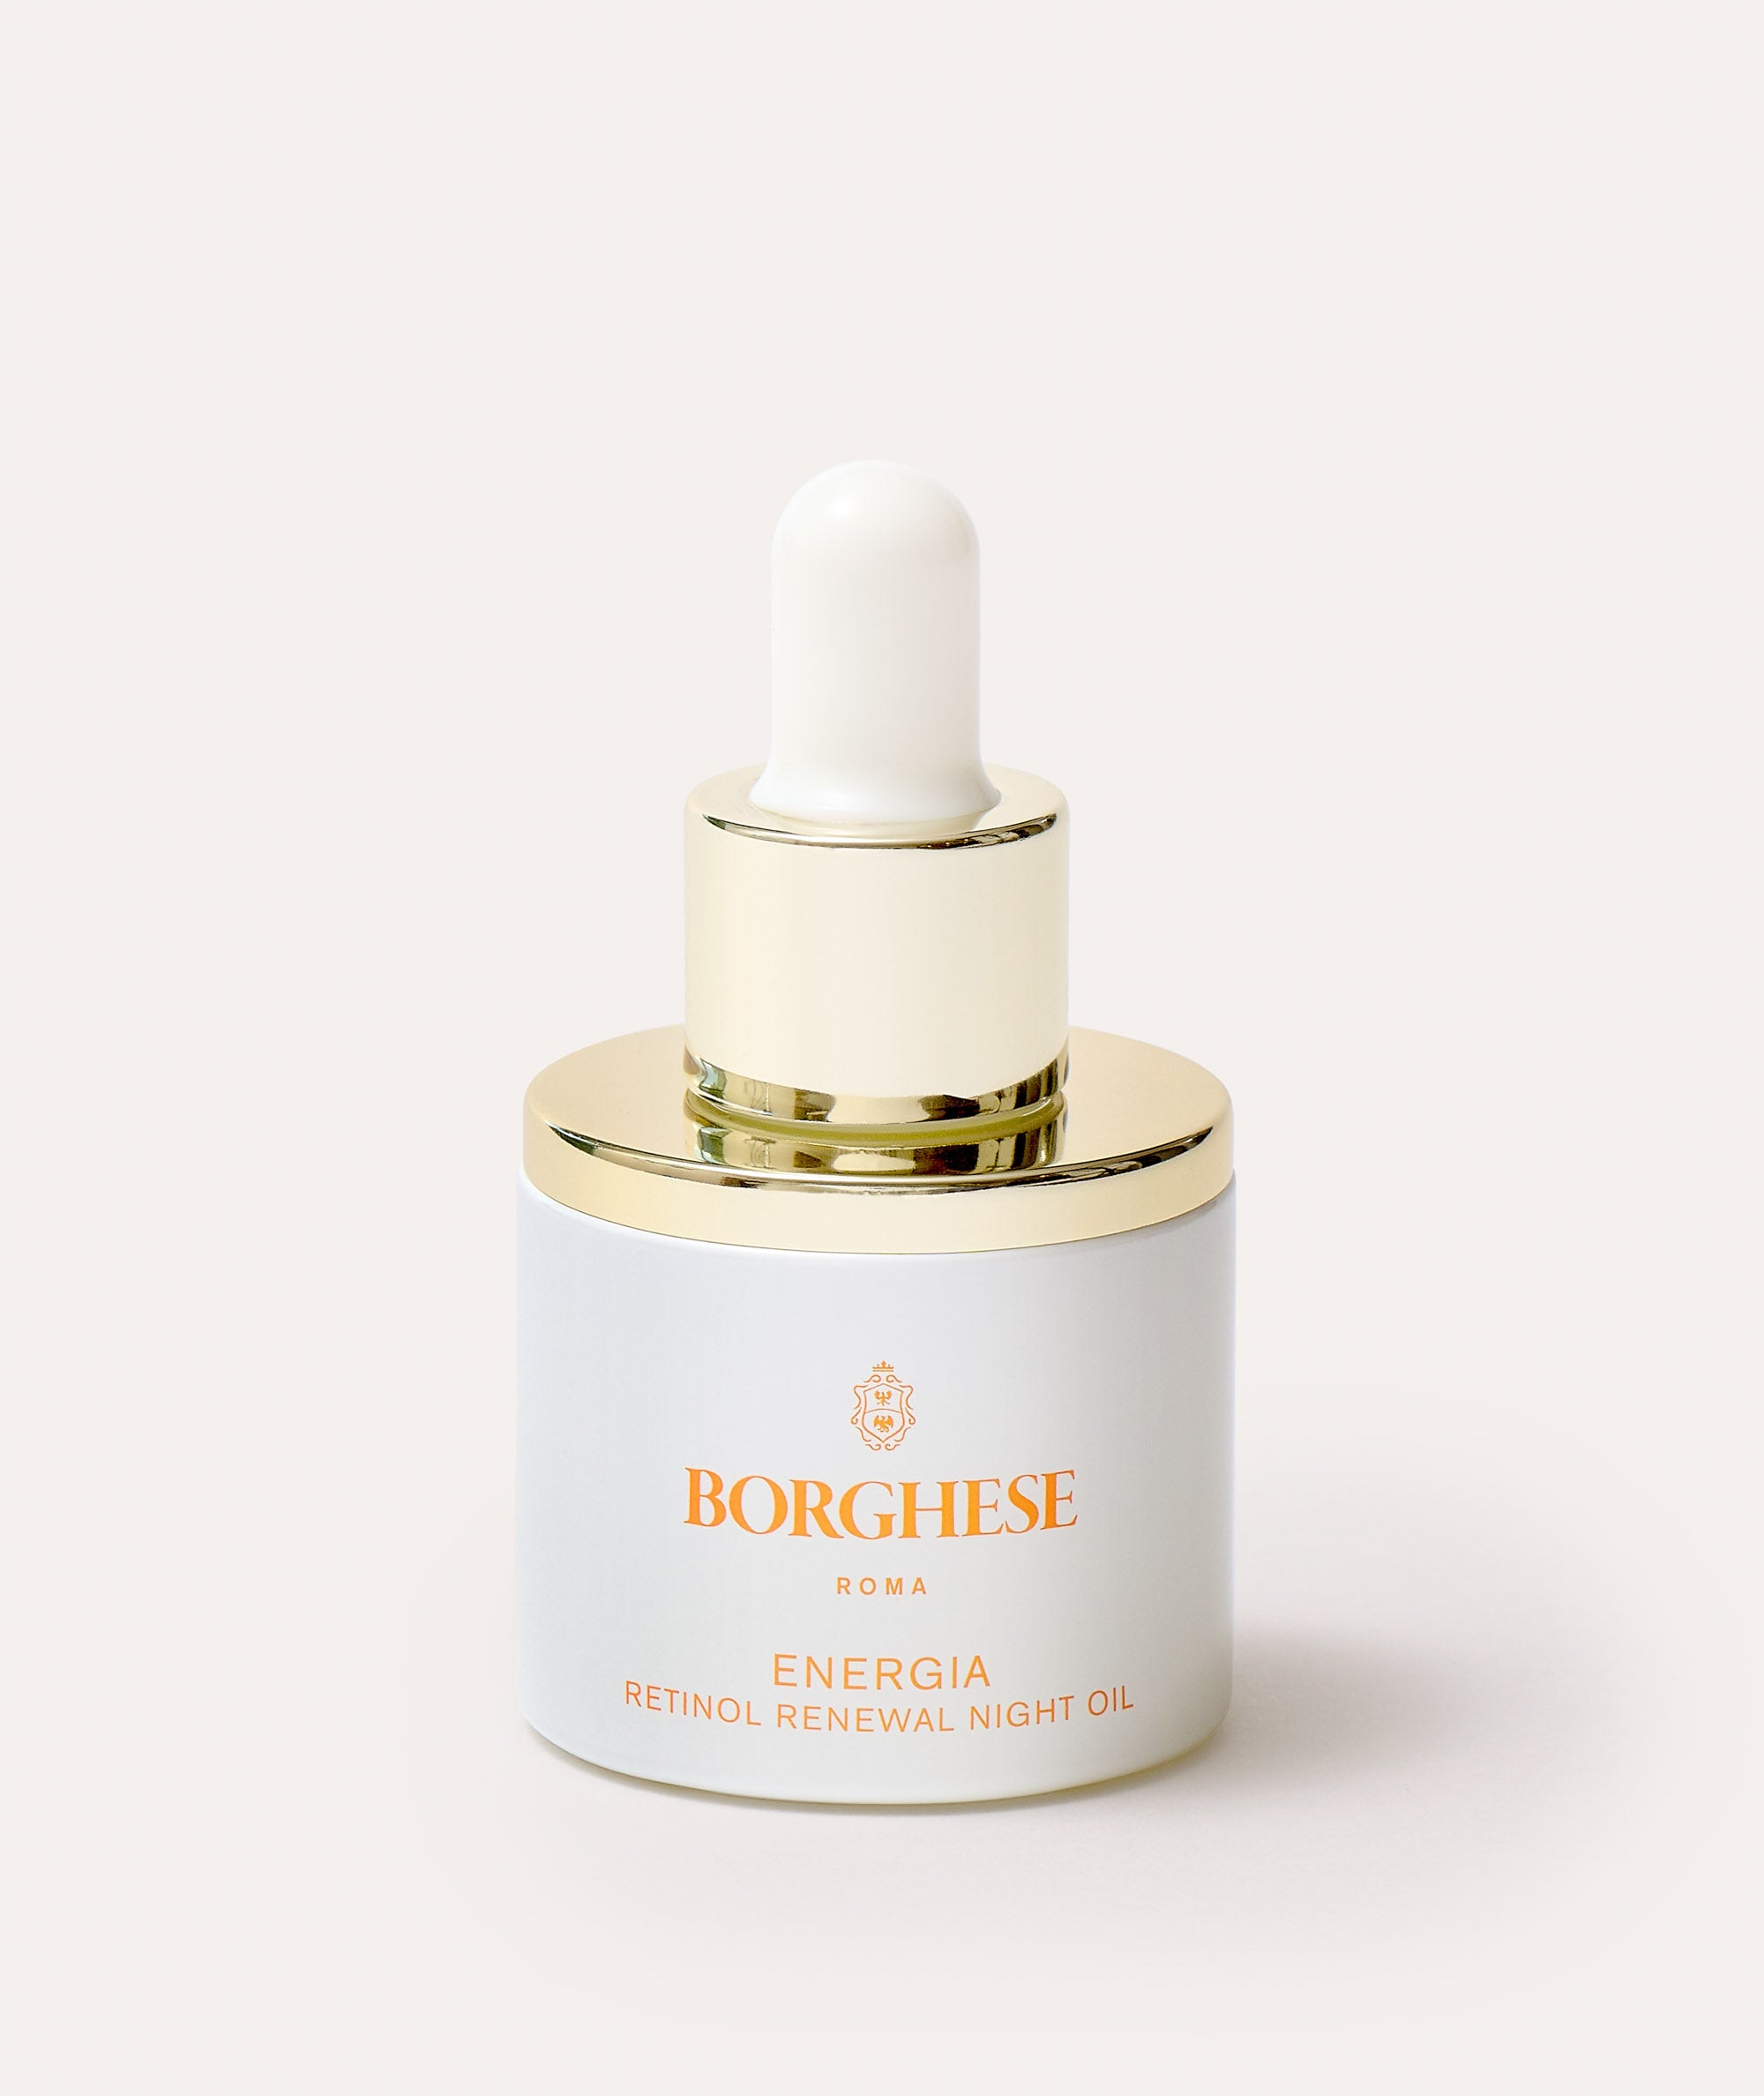 This is a picture of Borghese ENERGIA Retinol Renewal Night Oil bottle